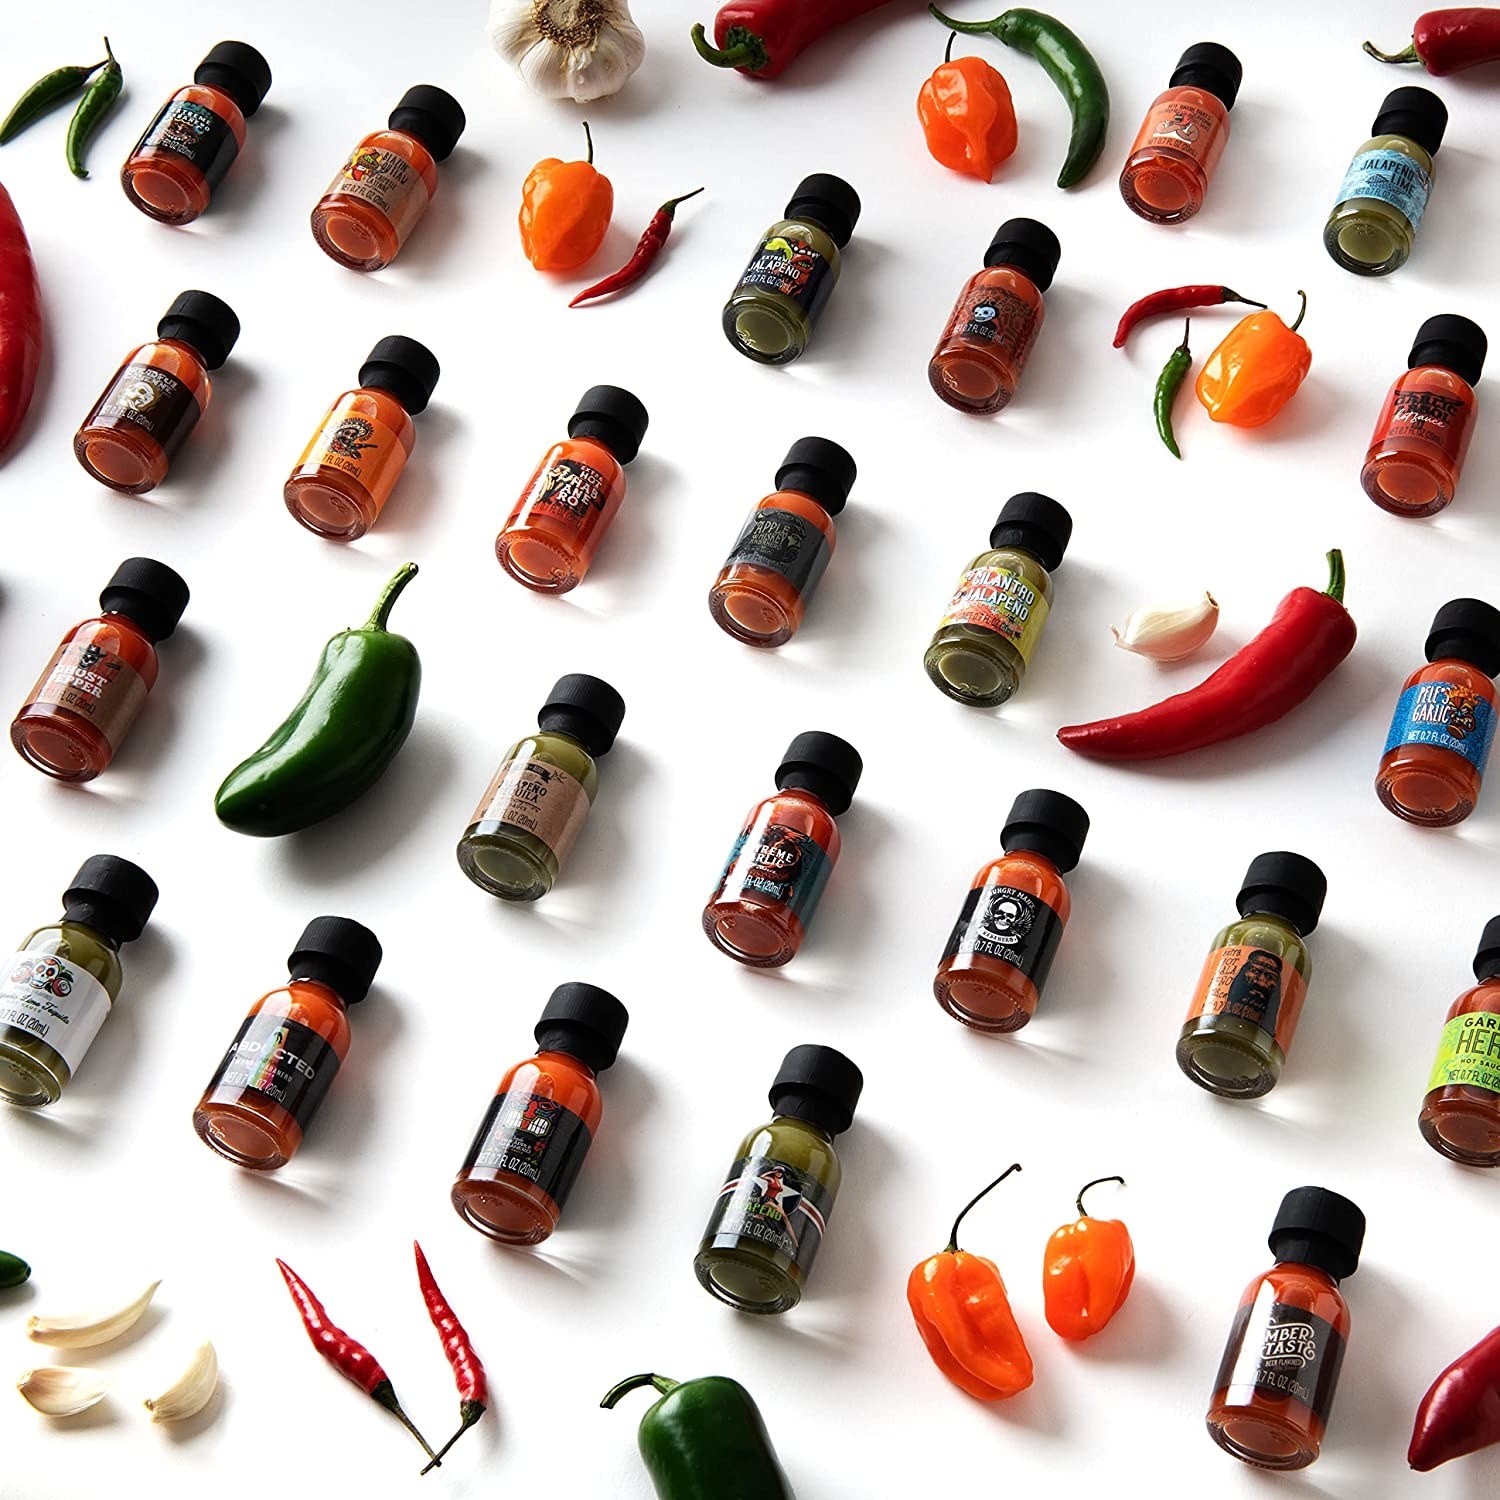 the bottles of hot sauce laid out on a simple background with hot peppers and garlic cloves